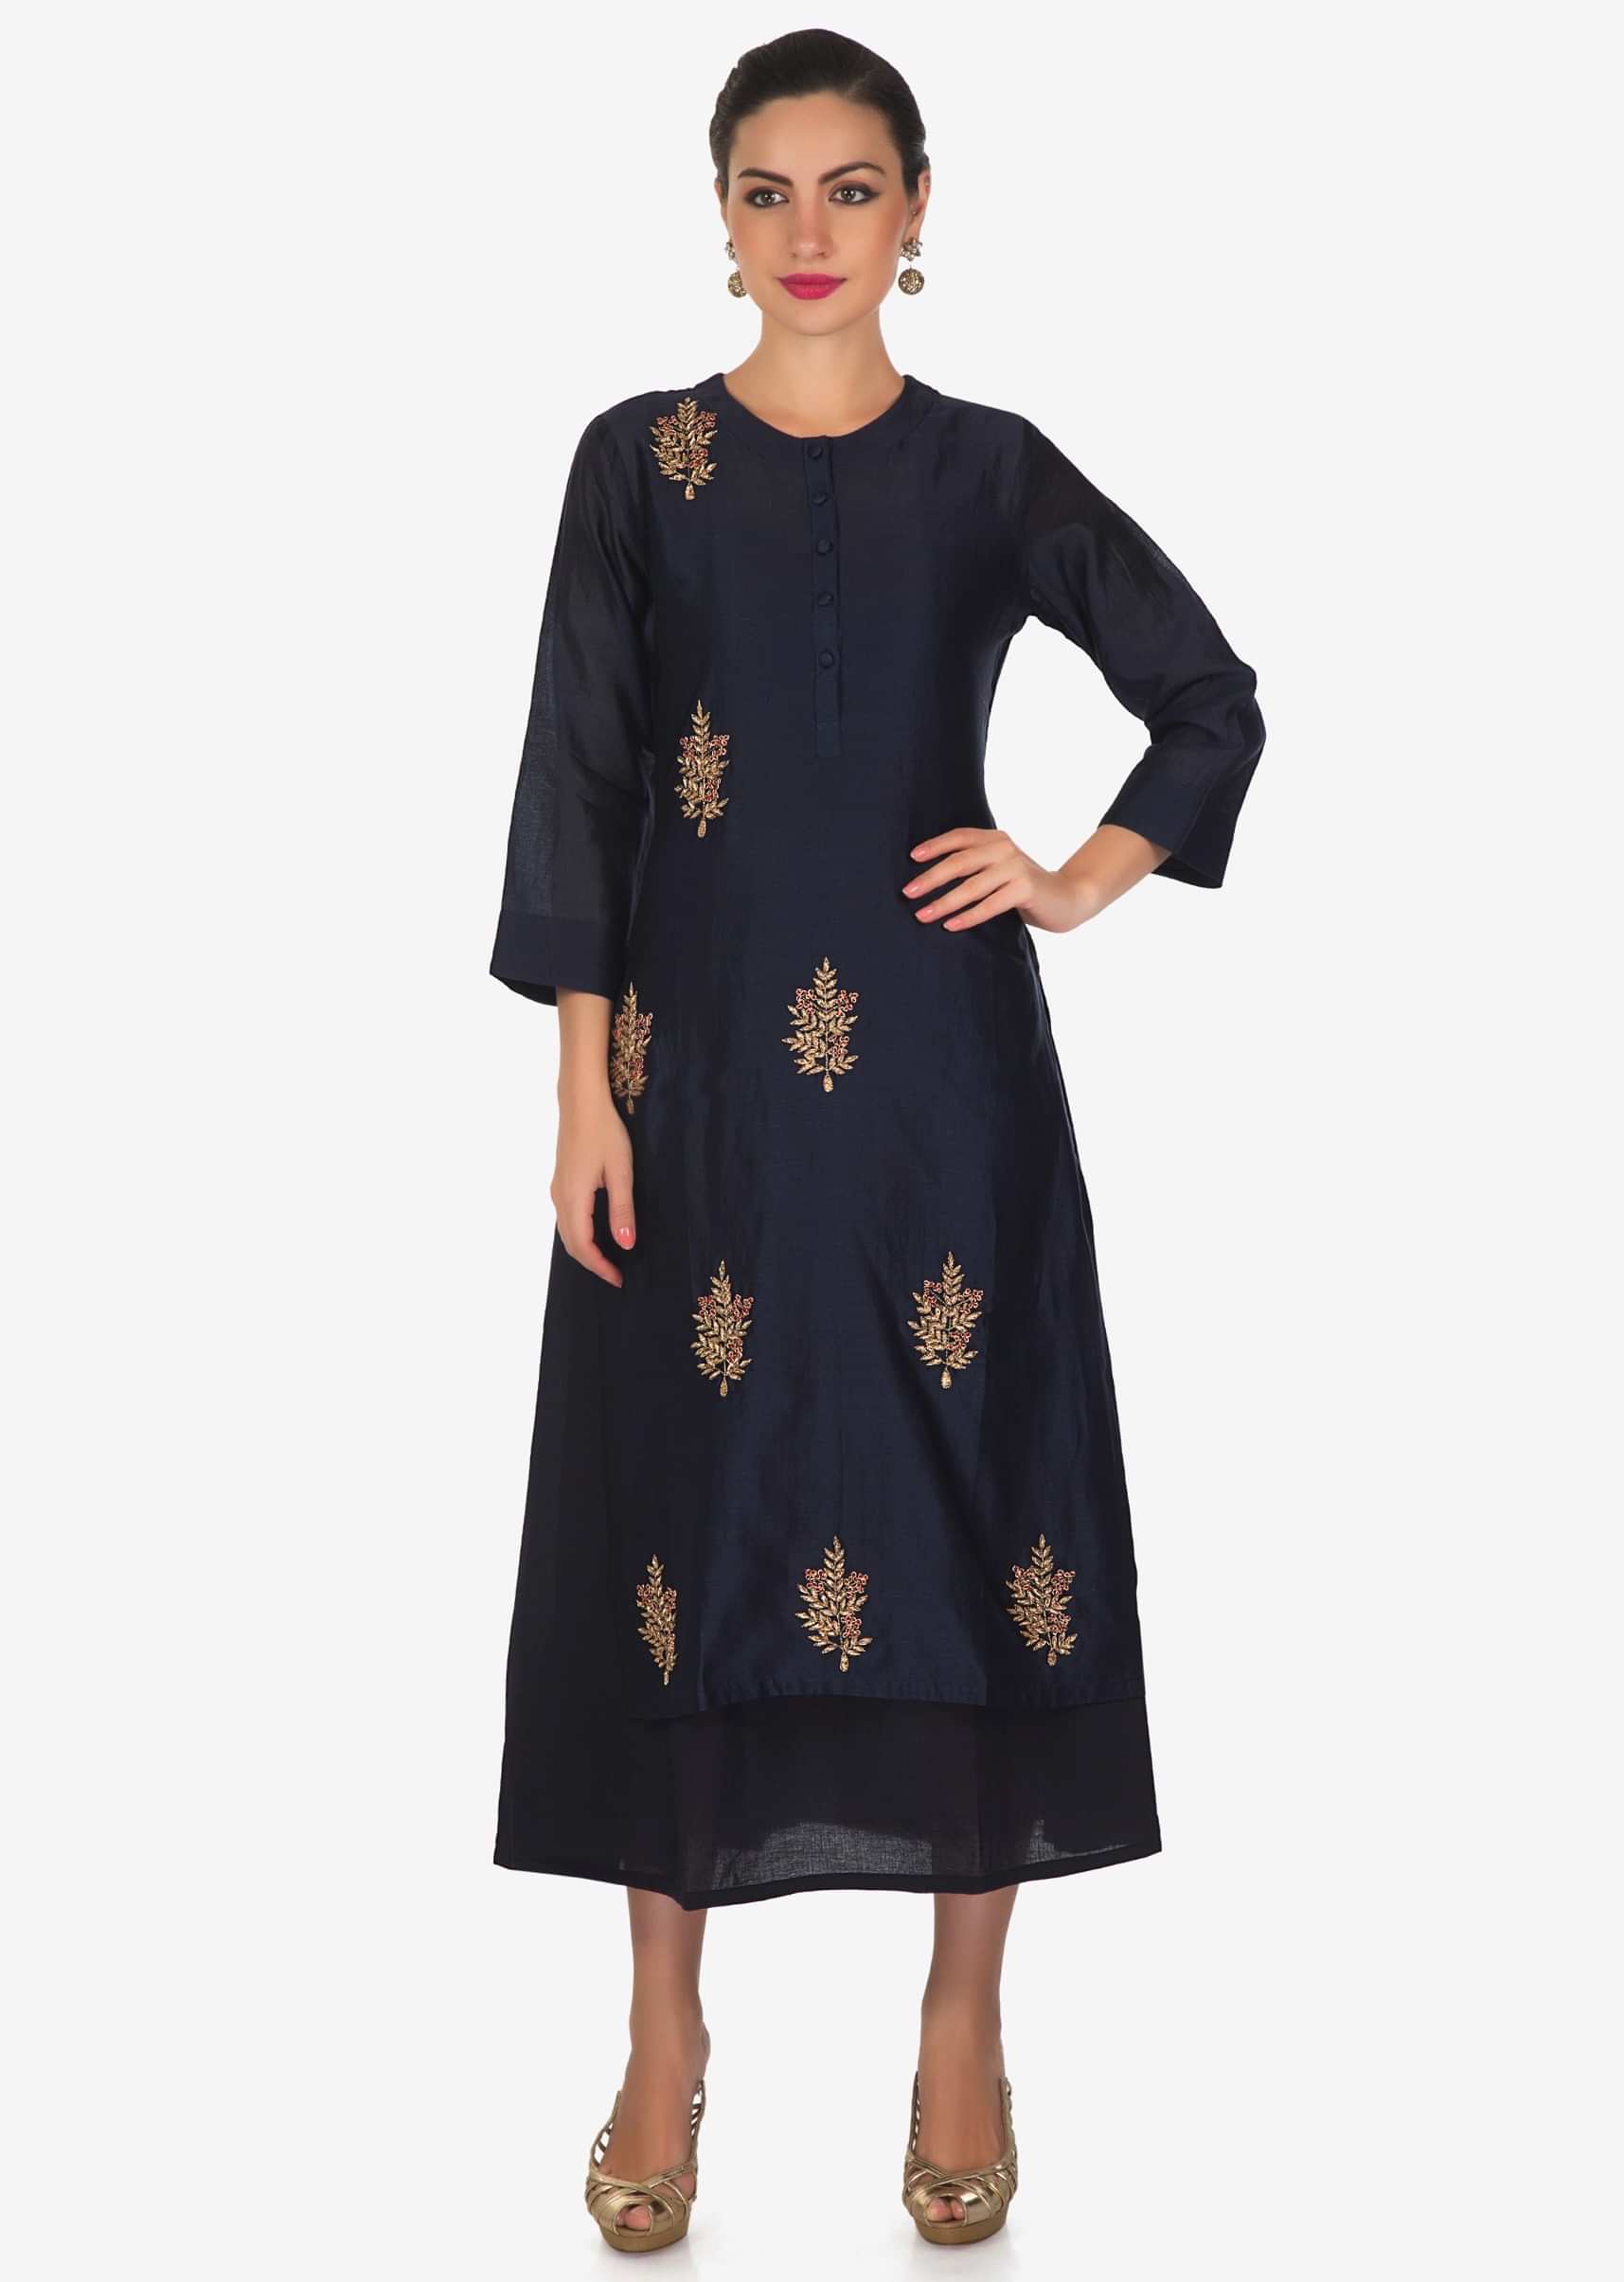 Navy blue double layer dress in cotton silk with in zardosi butti only on Kalki